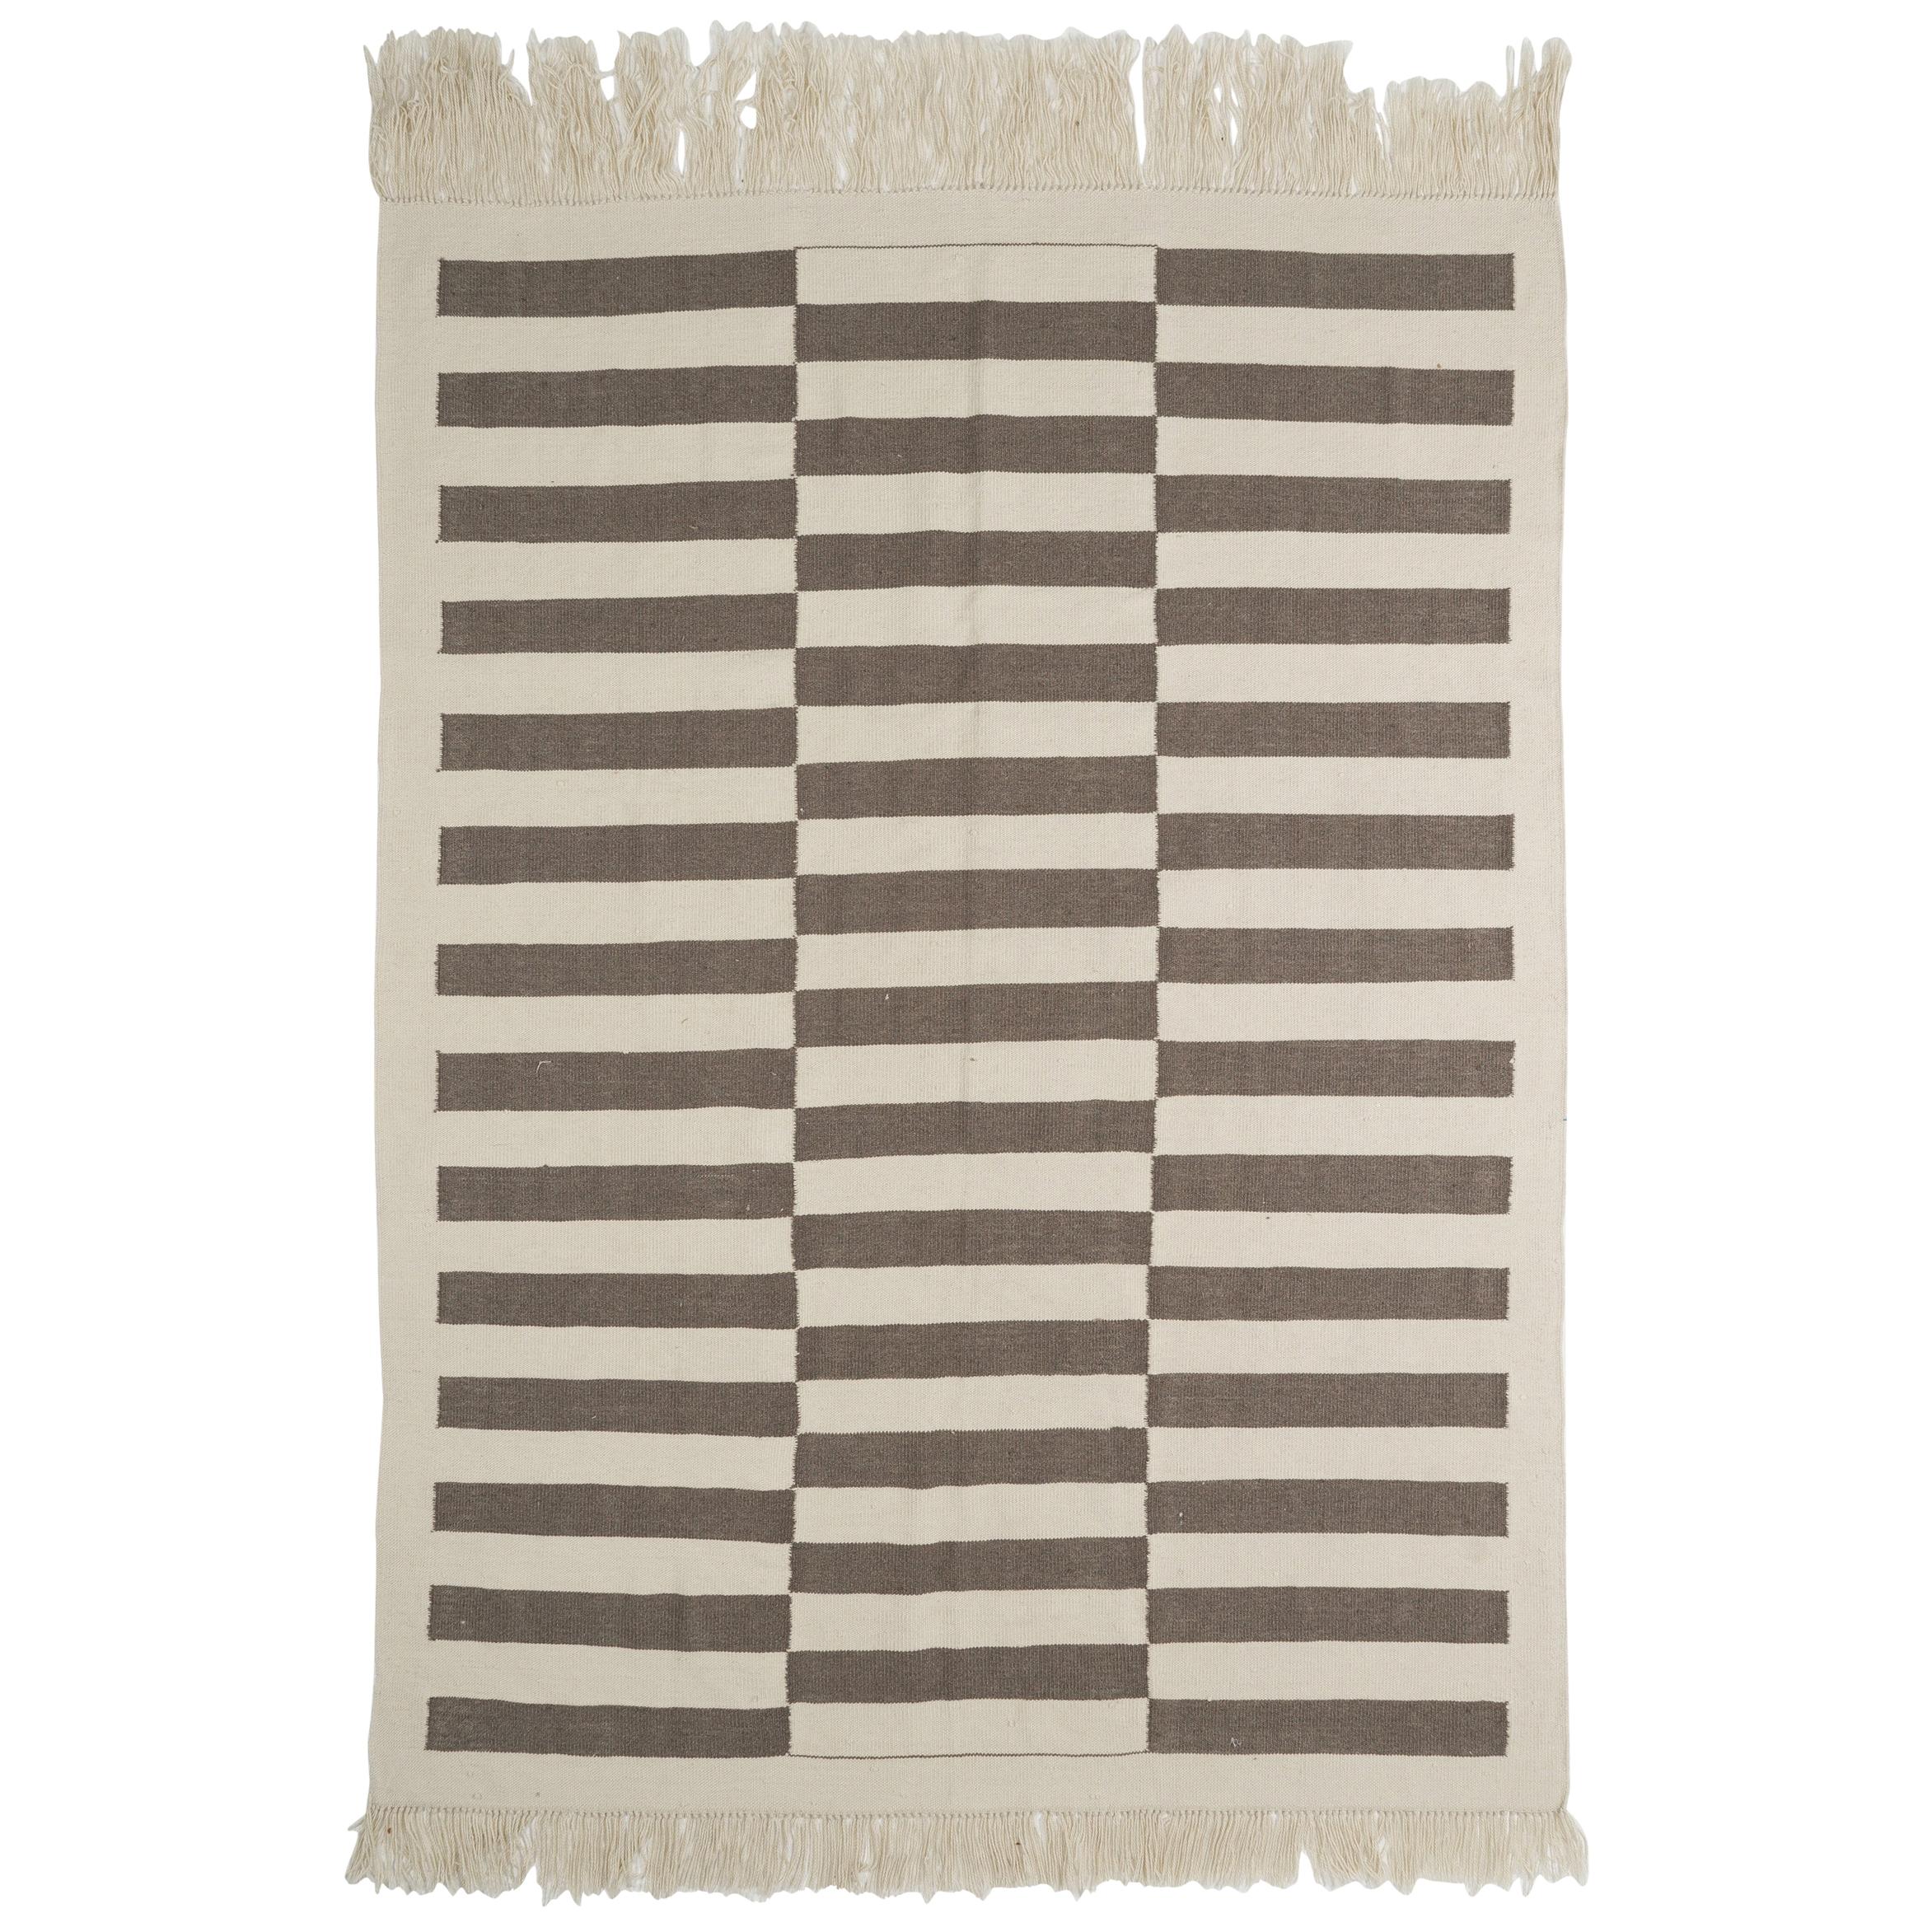 8x10.8 Ft Hand-Woven Turkish Natural Undyed Wool Kilim. Custom Options Available